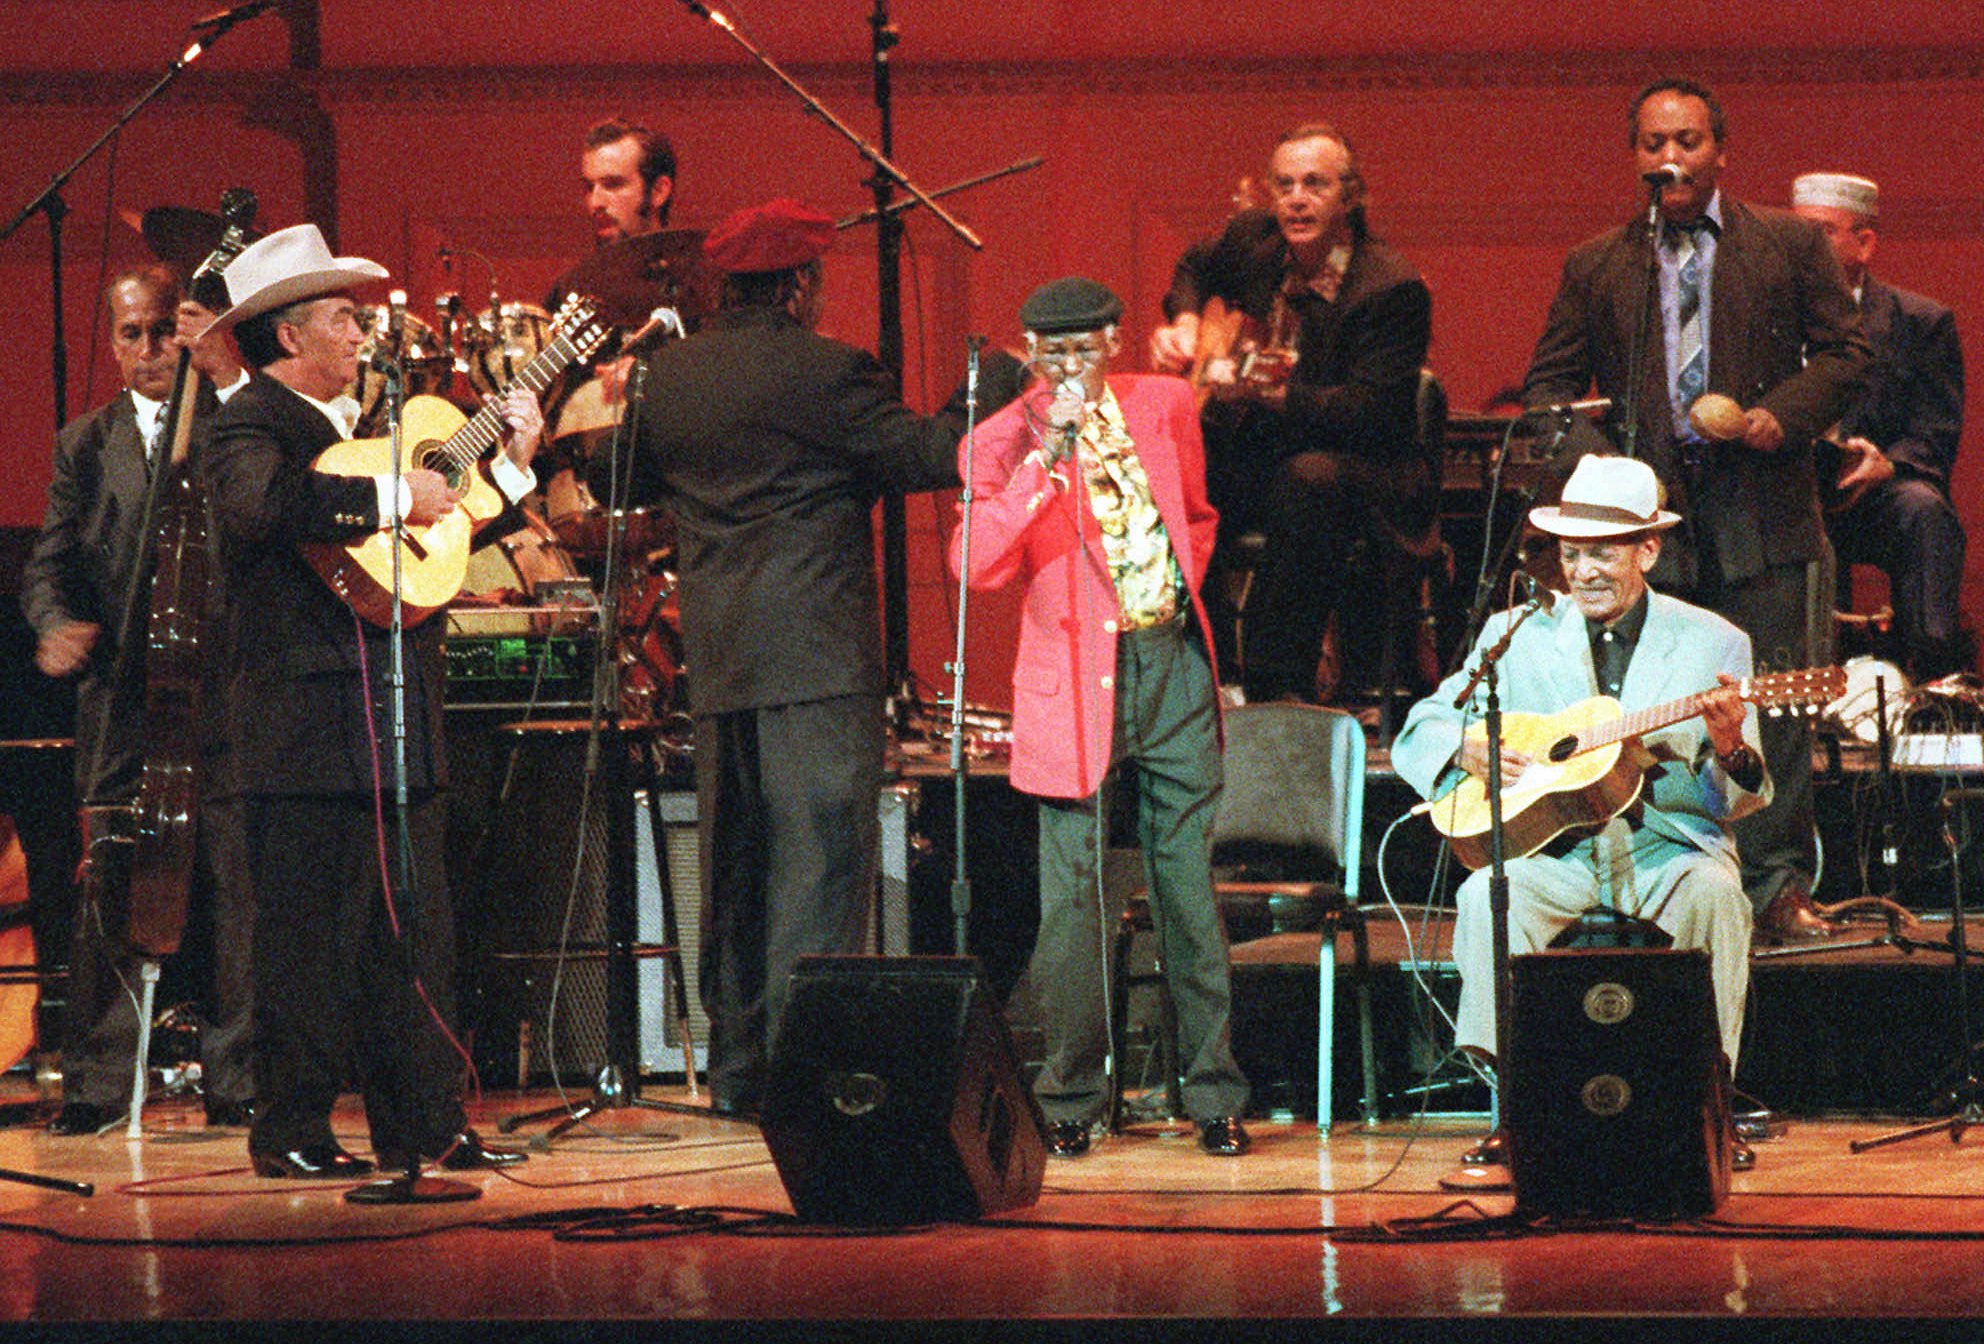 The Buena Vista Social Club performs at New York's Carnegie Hall in 1998.